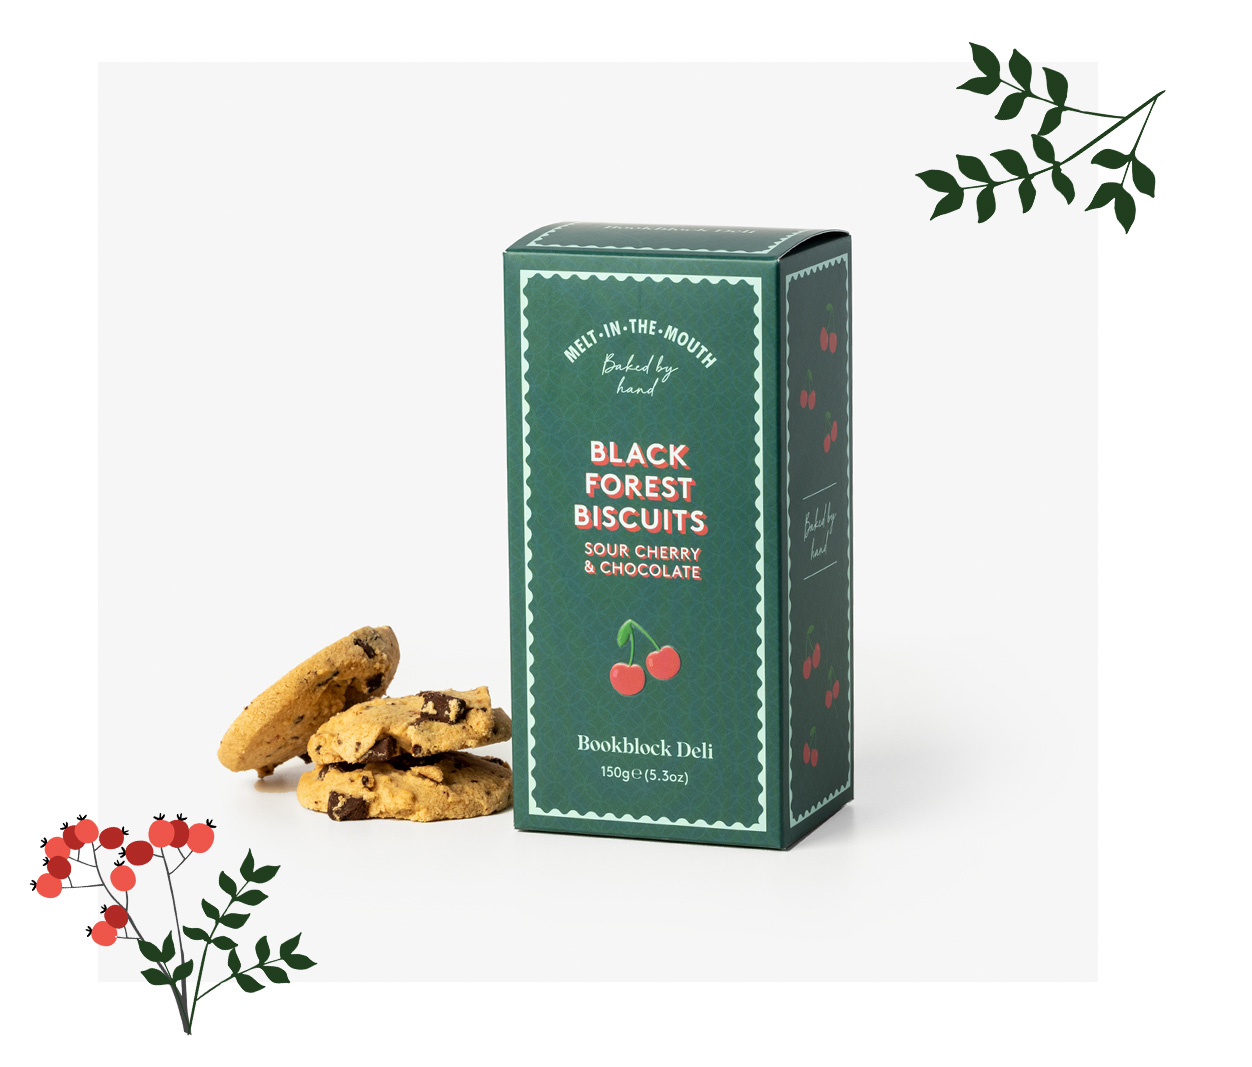 Black Forest Biscuits with illustrated christmas foliage in green and red